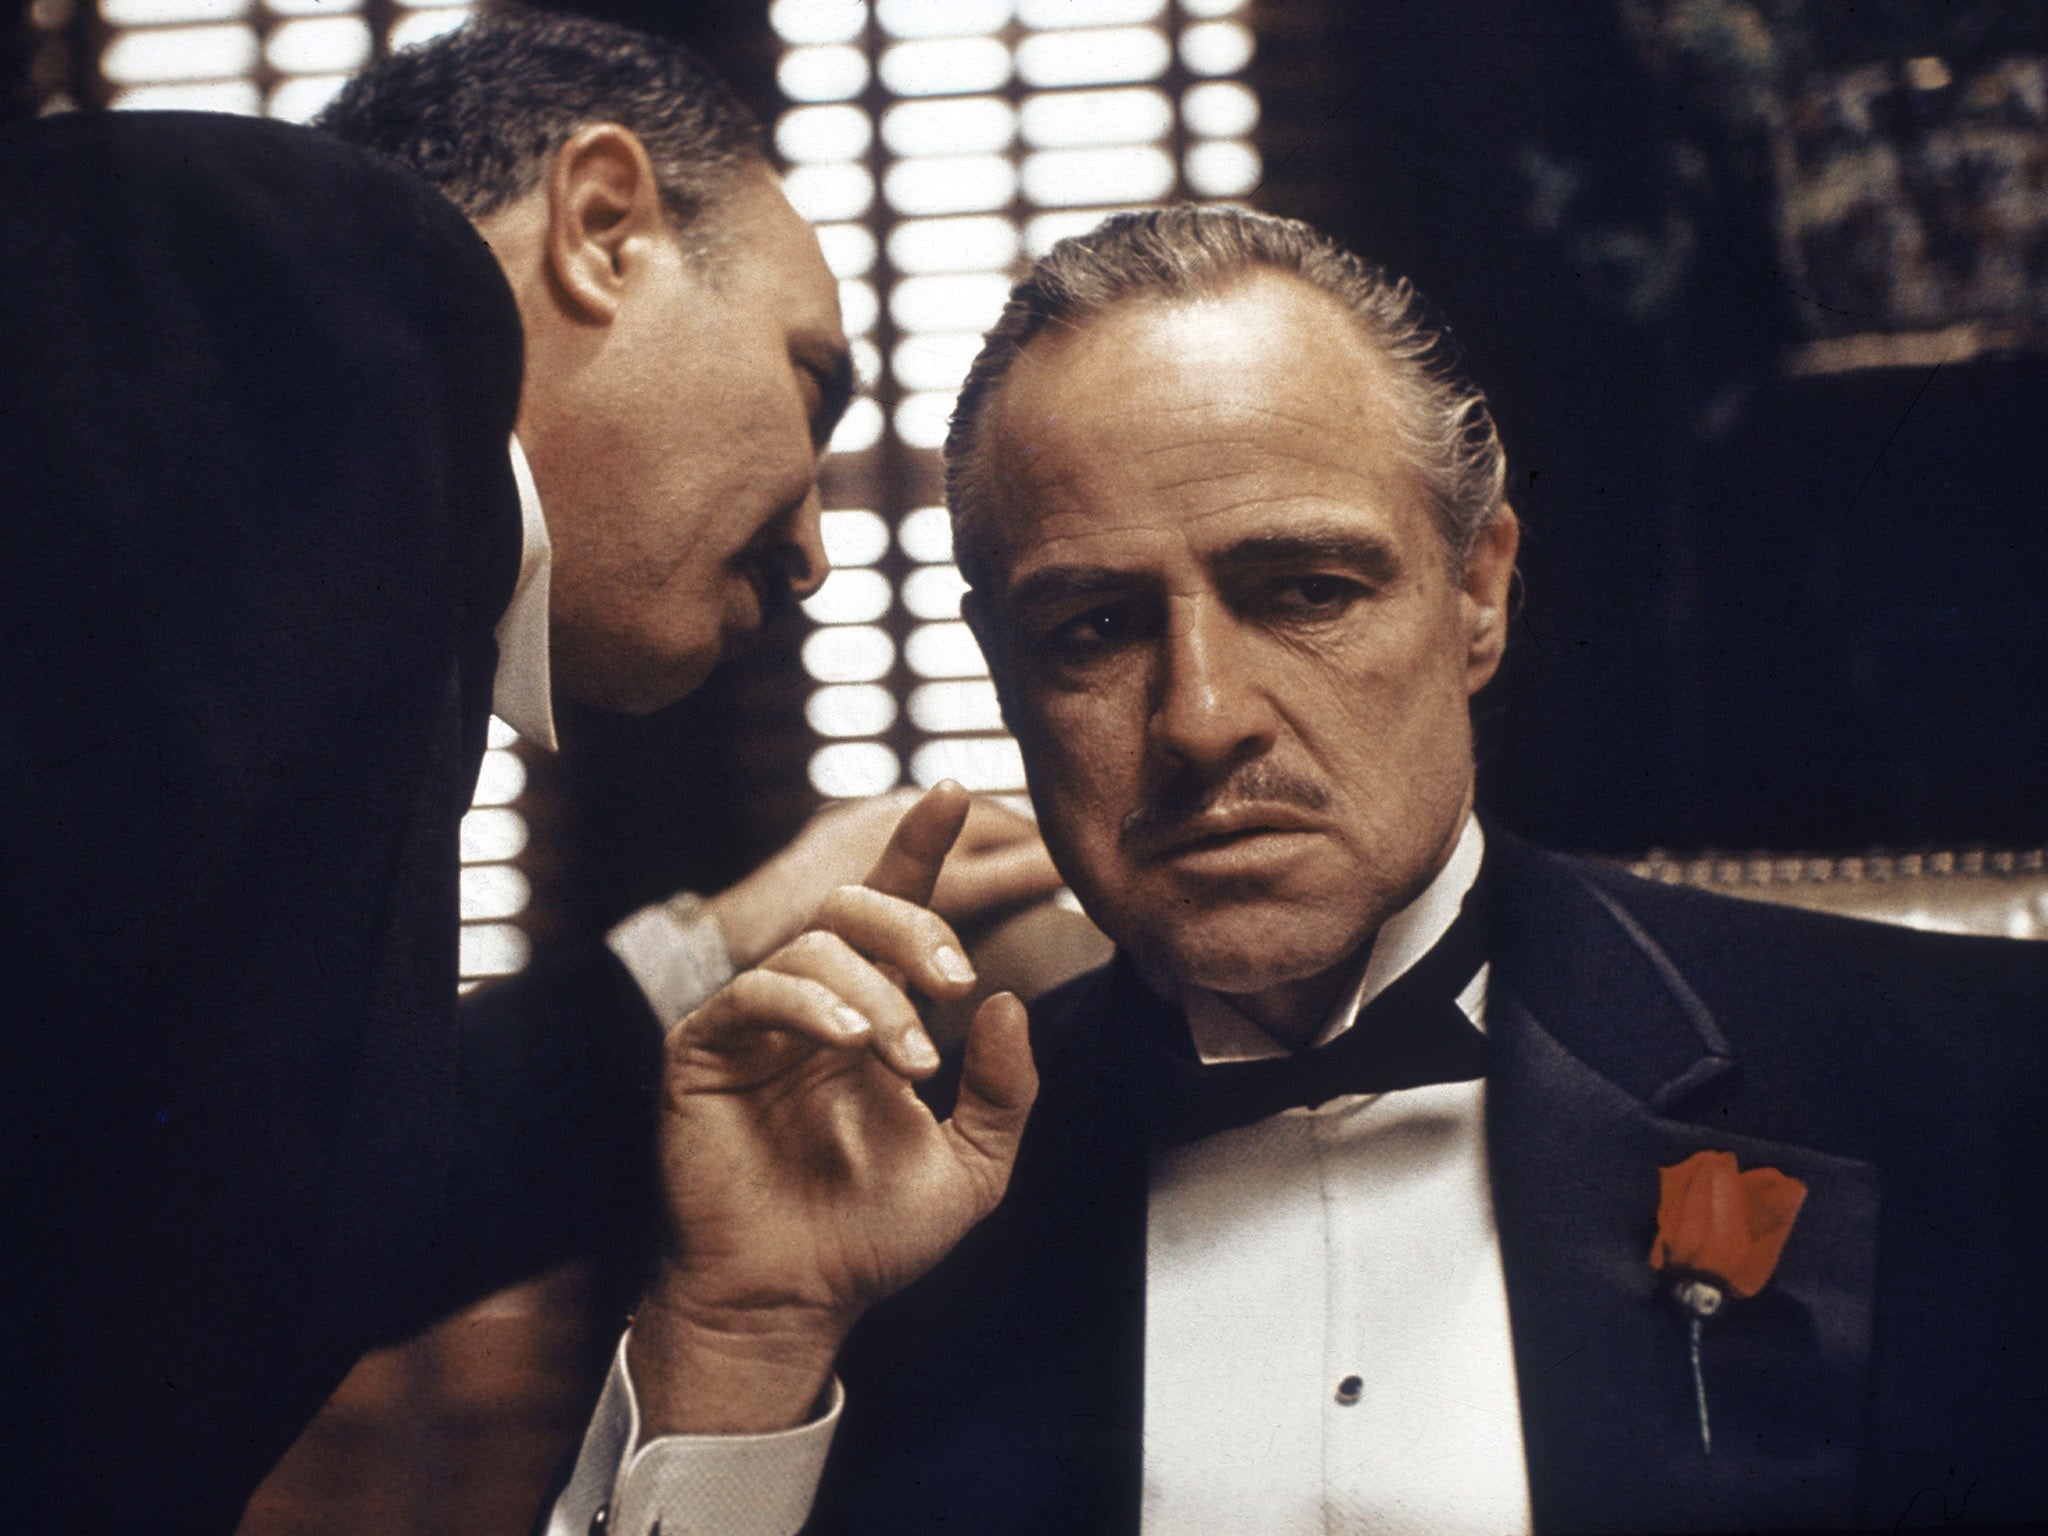 ‘Eventually, you could see that something extraordinary was happening’: Marlon Brando in ‘The Godfather'